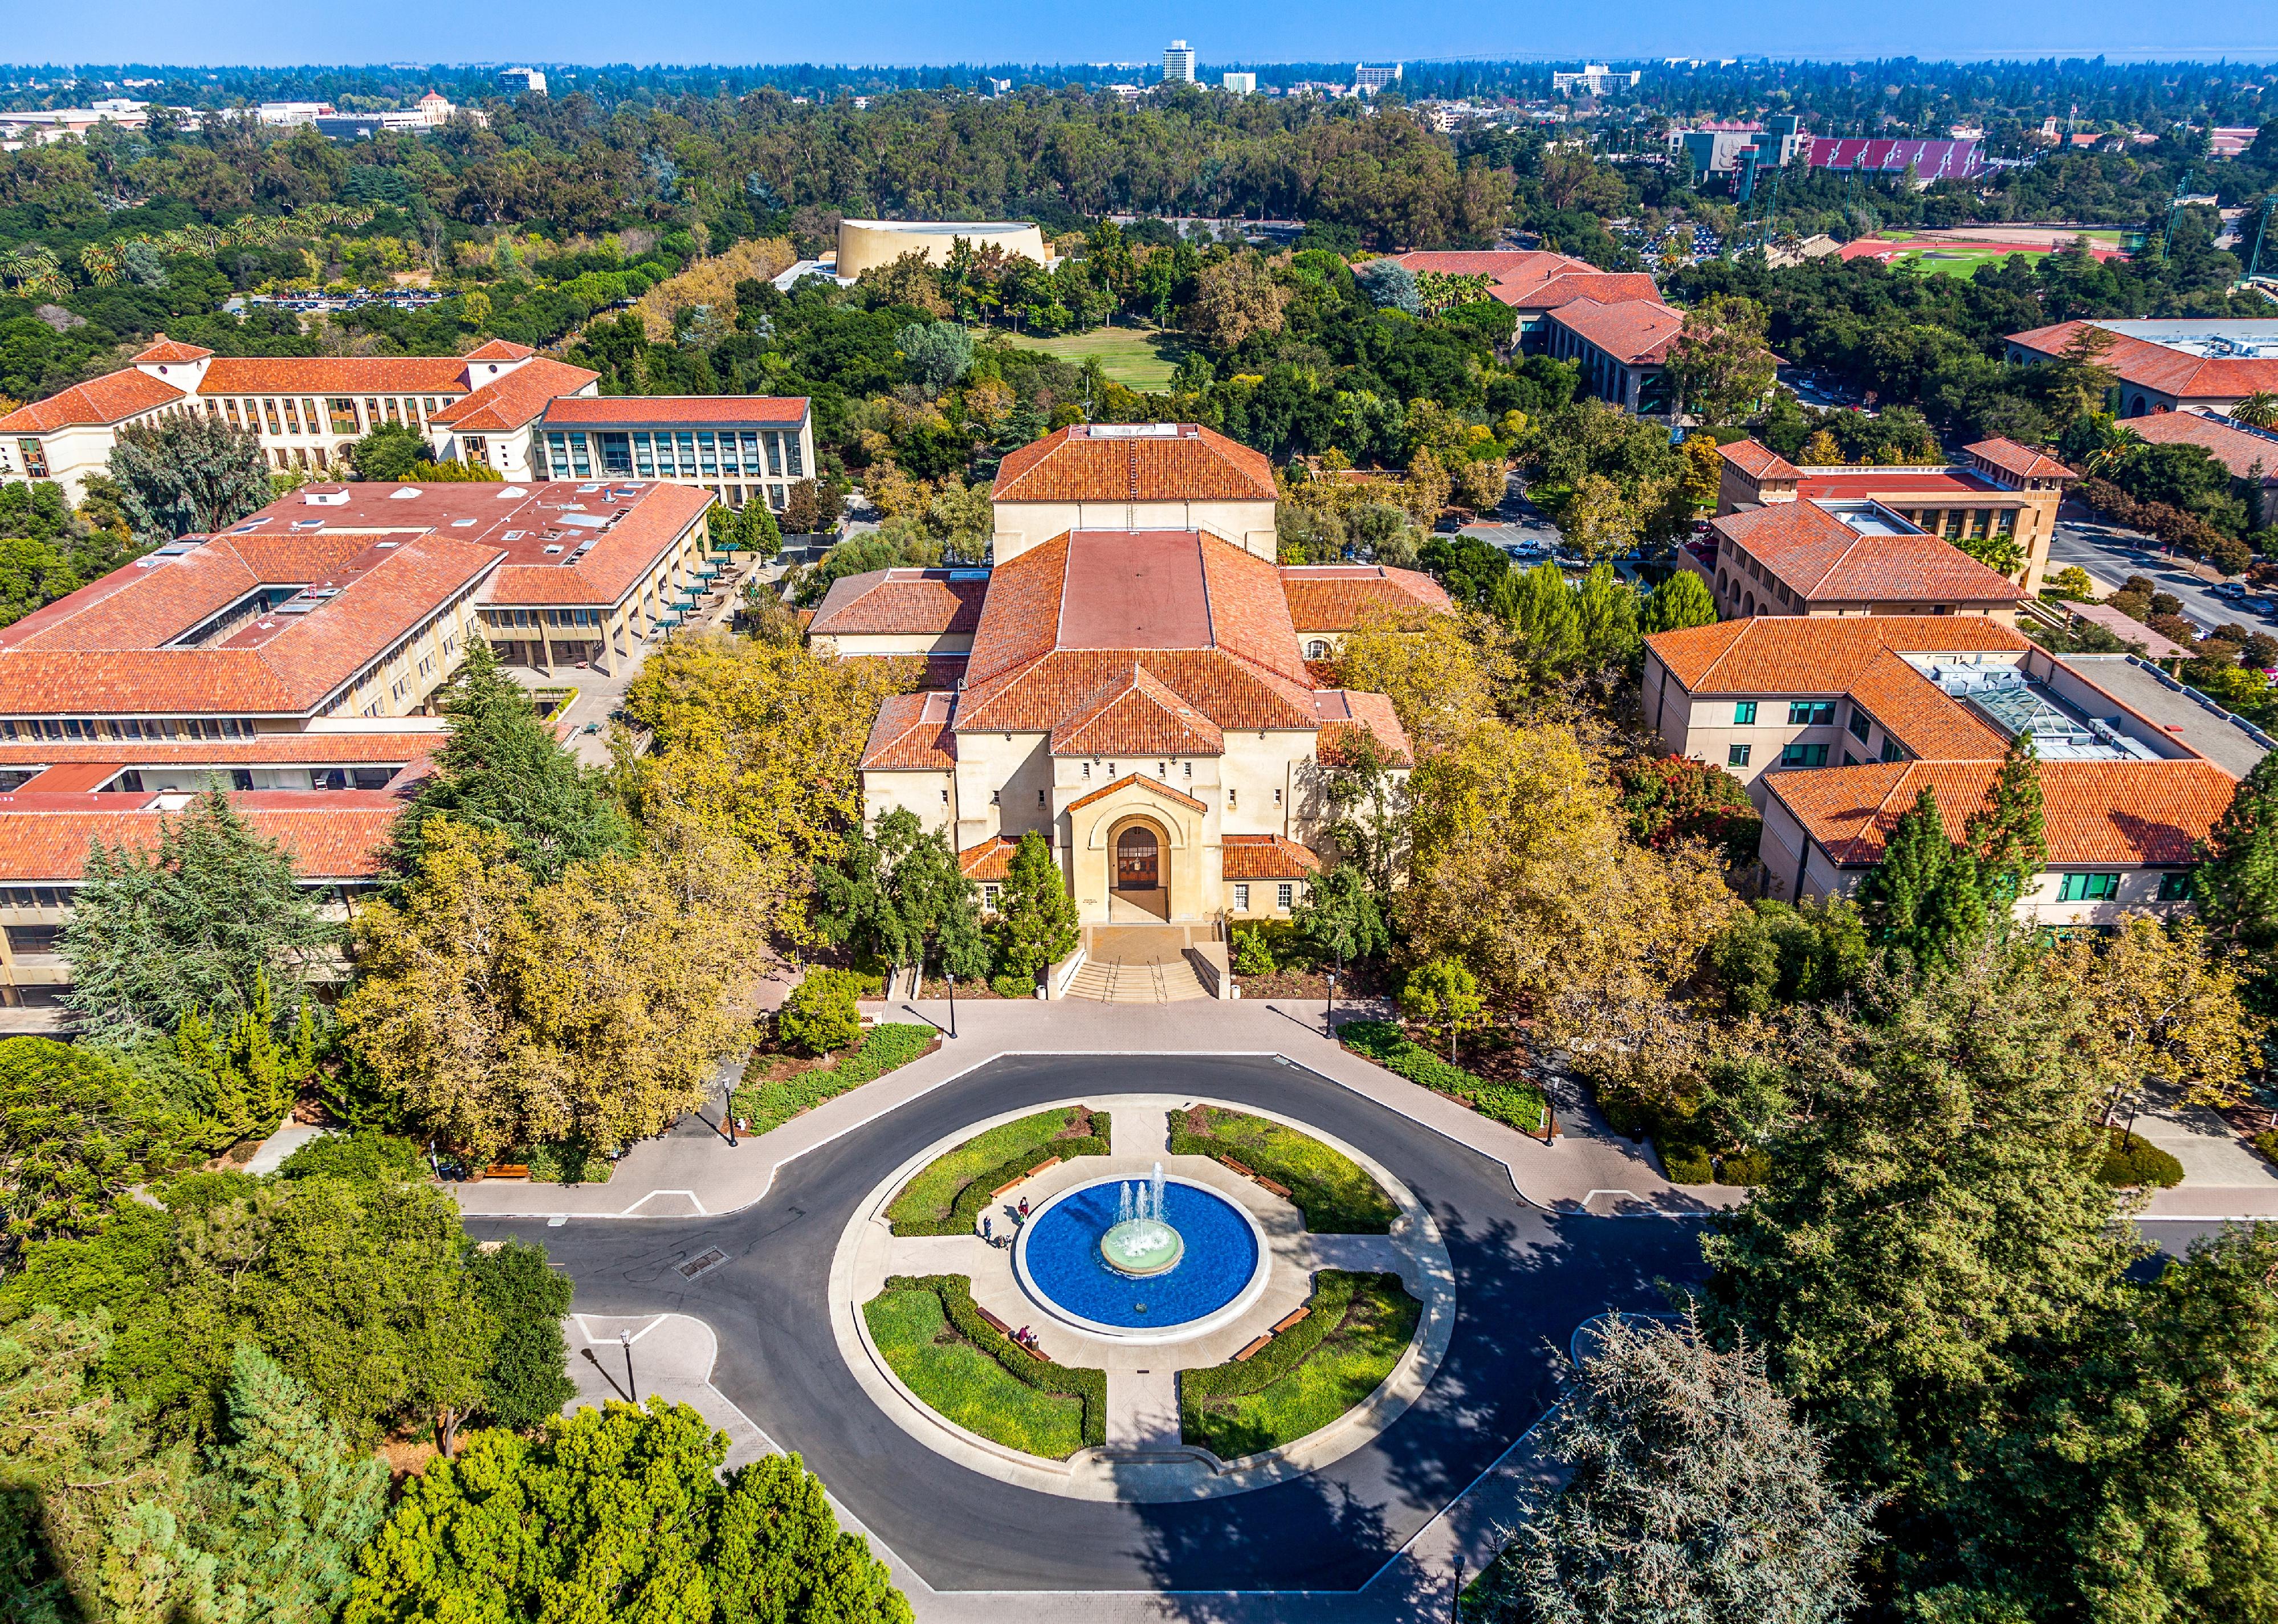 Aerial view of historic Stanford University campus.